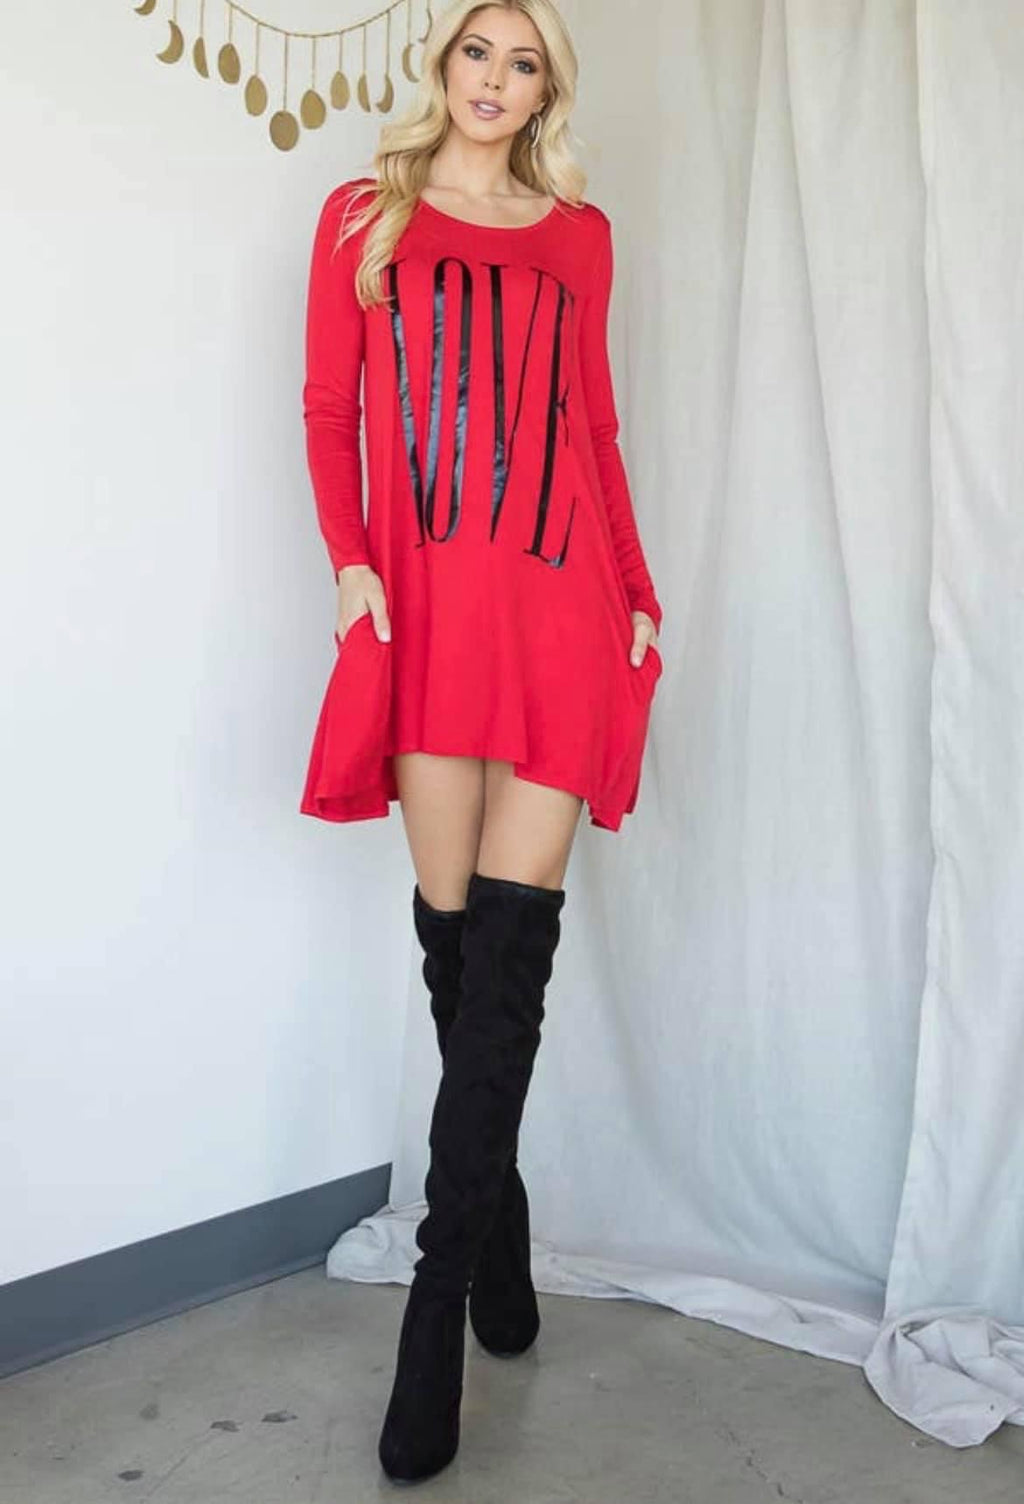 RED LOVE DRESS/BLOUSE WITH POCKETS - Lil Monkey Boutique